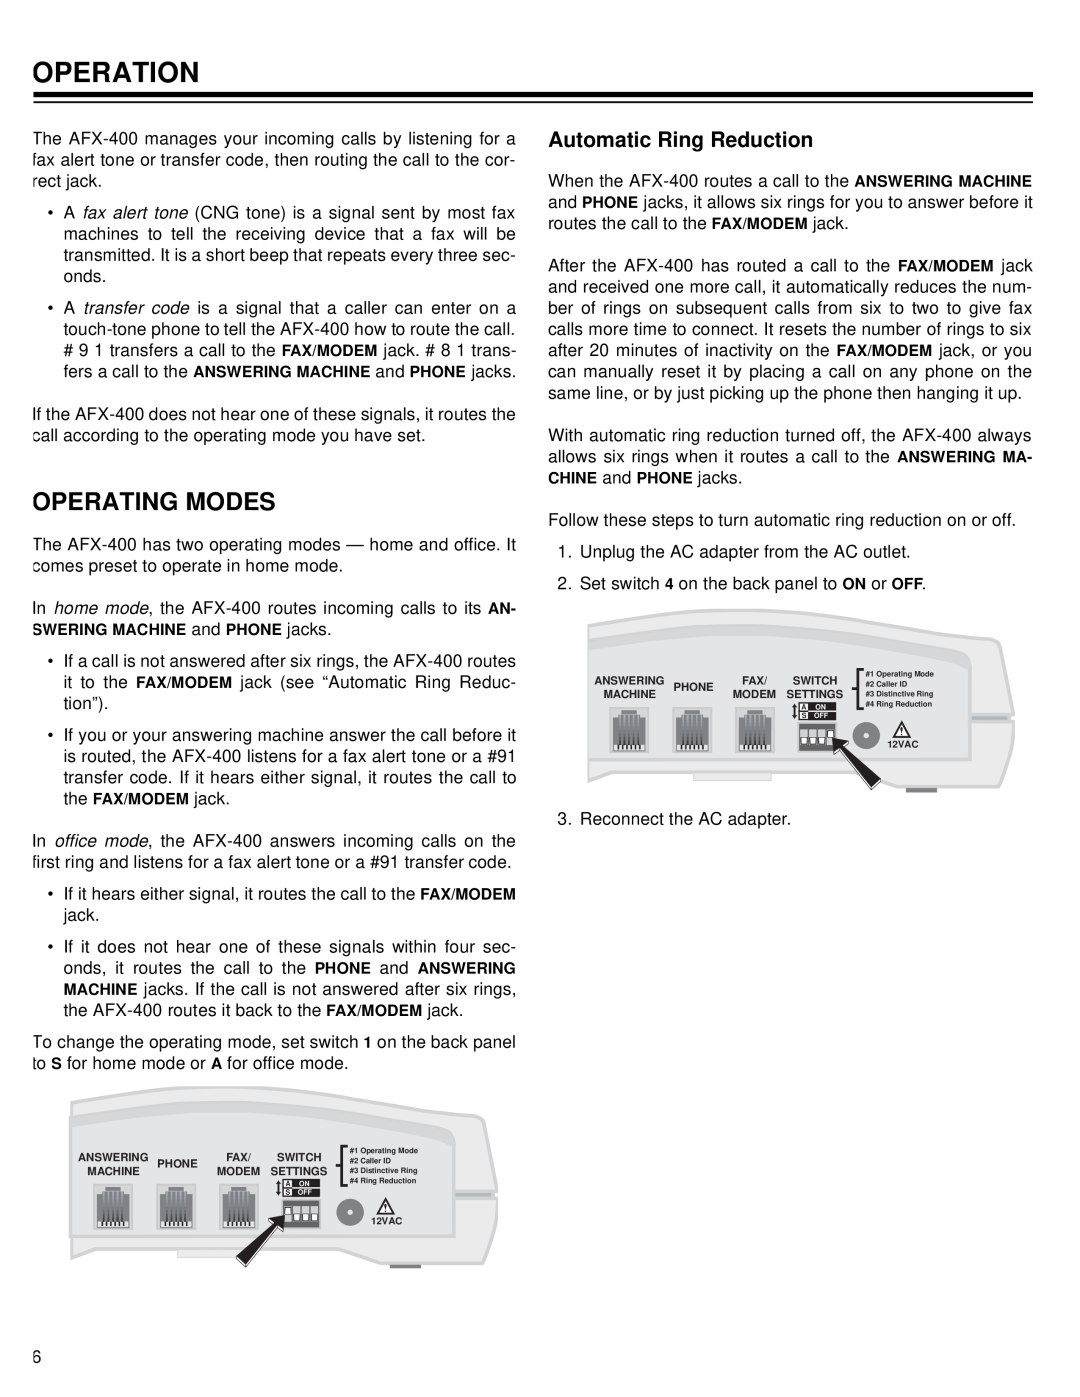 Radio Shack AFX-400 owner manual Operation, Operating Modes, Automatic Ring Reduction, Illustration, switch 1 location 